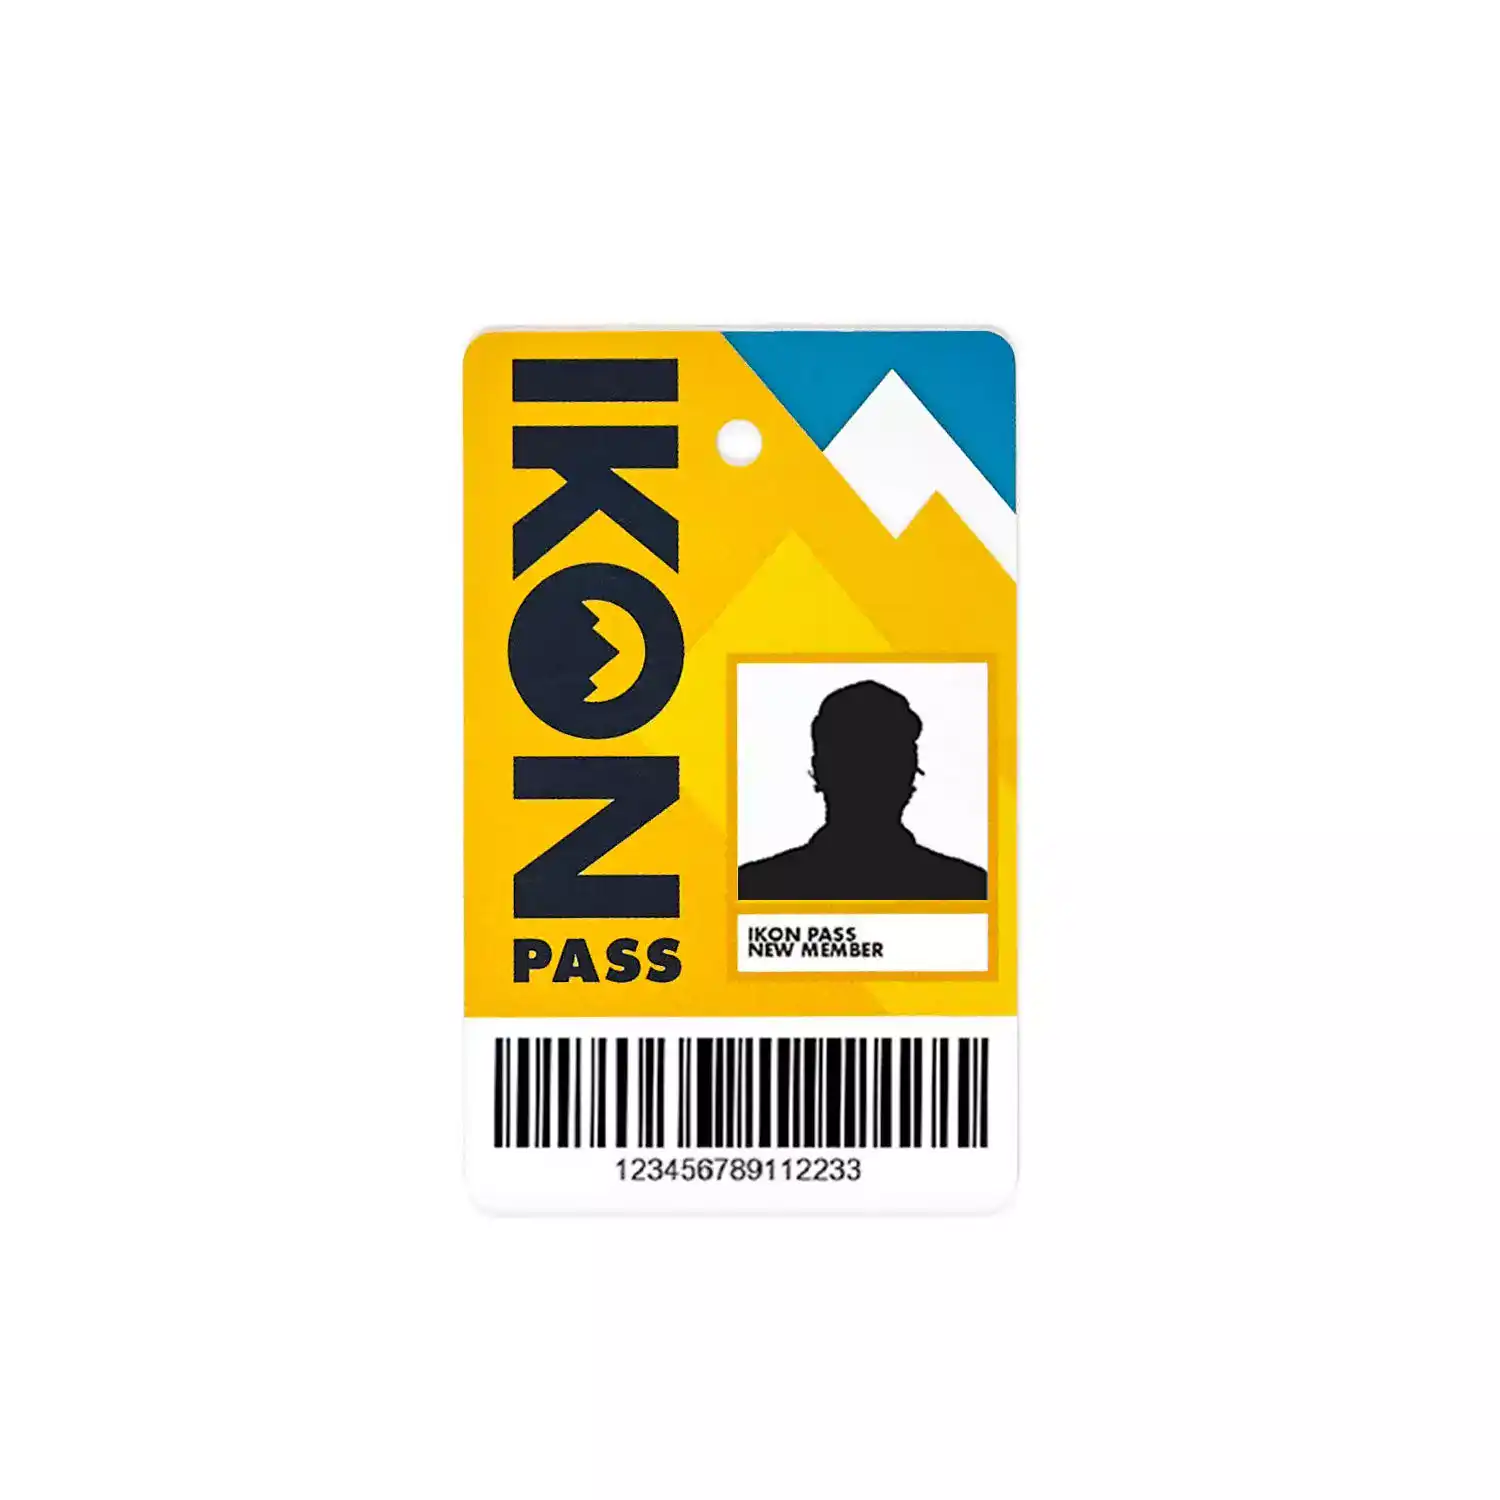 Picture is showing the Ikon pass